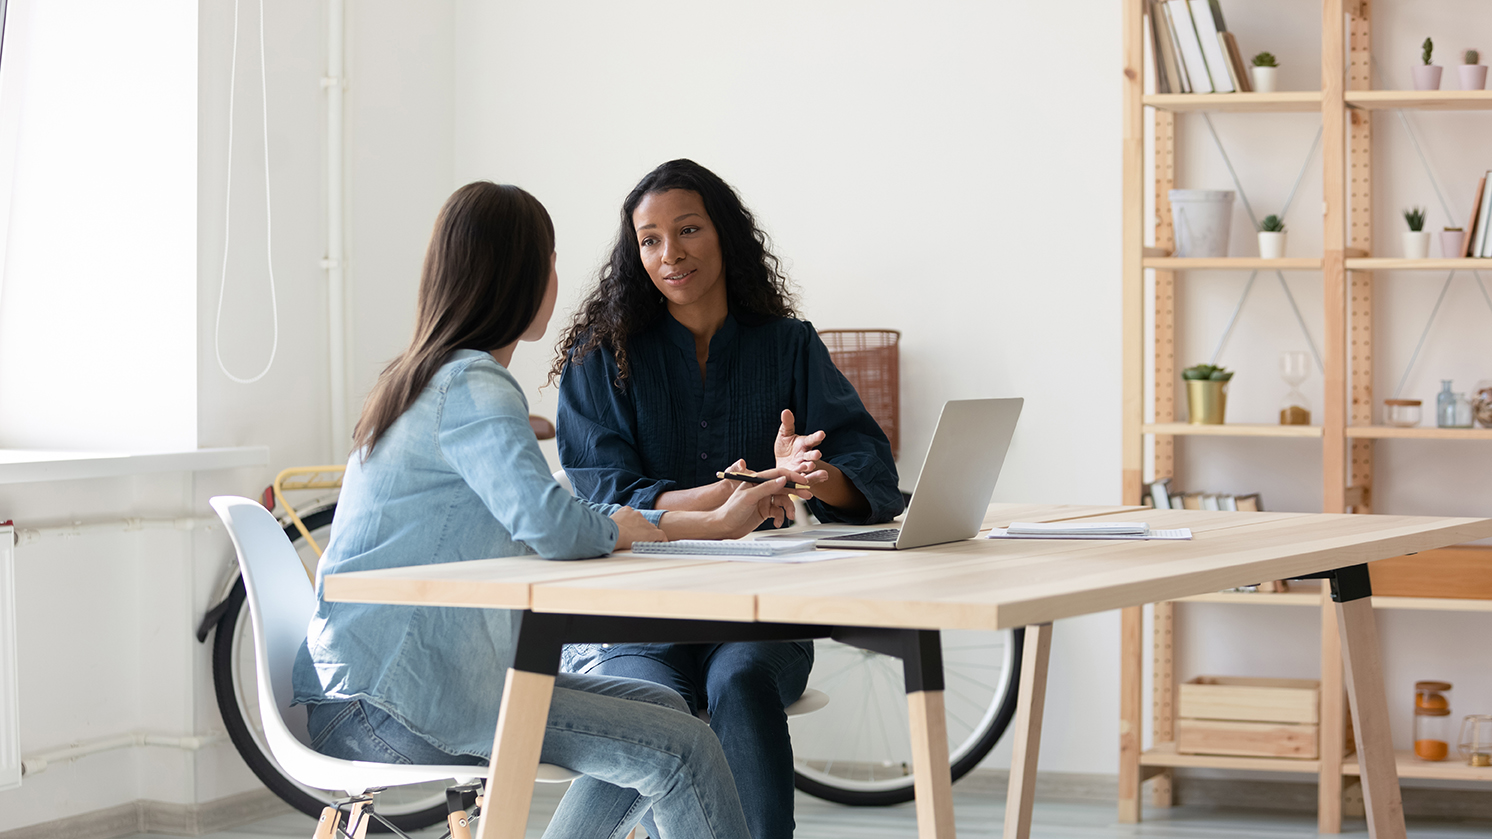 Smiling african american woman communicating with caucasian female colleague, sitting together at table in modern office. Young mixed race coworkers discussing working issues together at workplace.